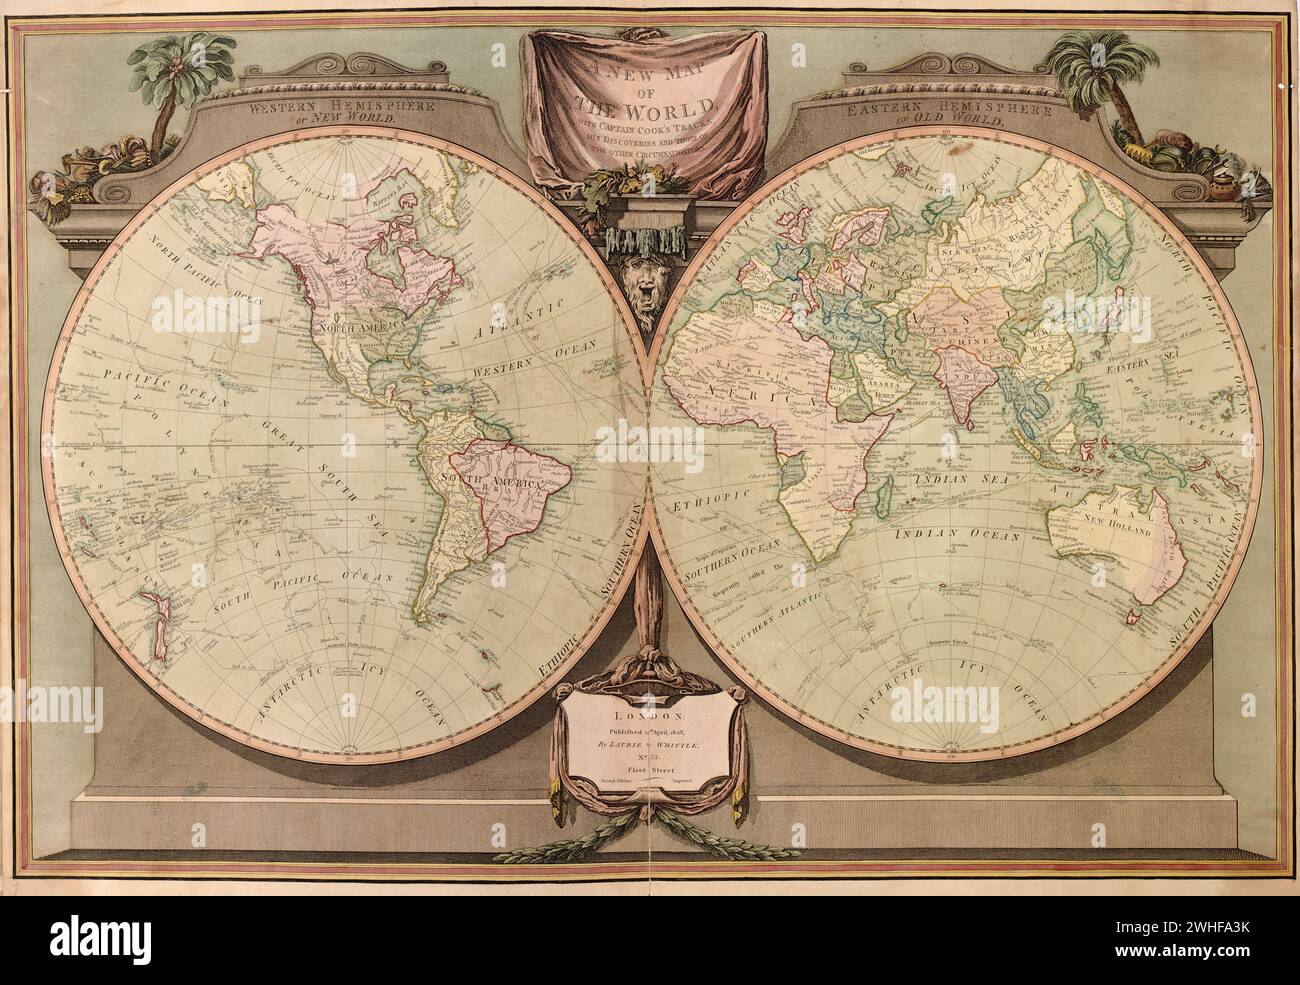 Vintage map of the world using two hemispheres  ca. 1808 Stock Photo